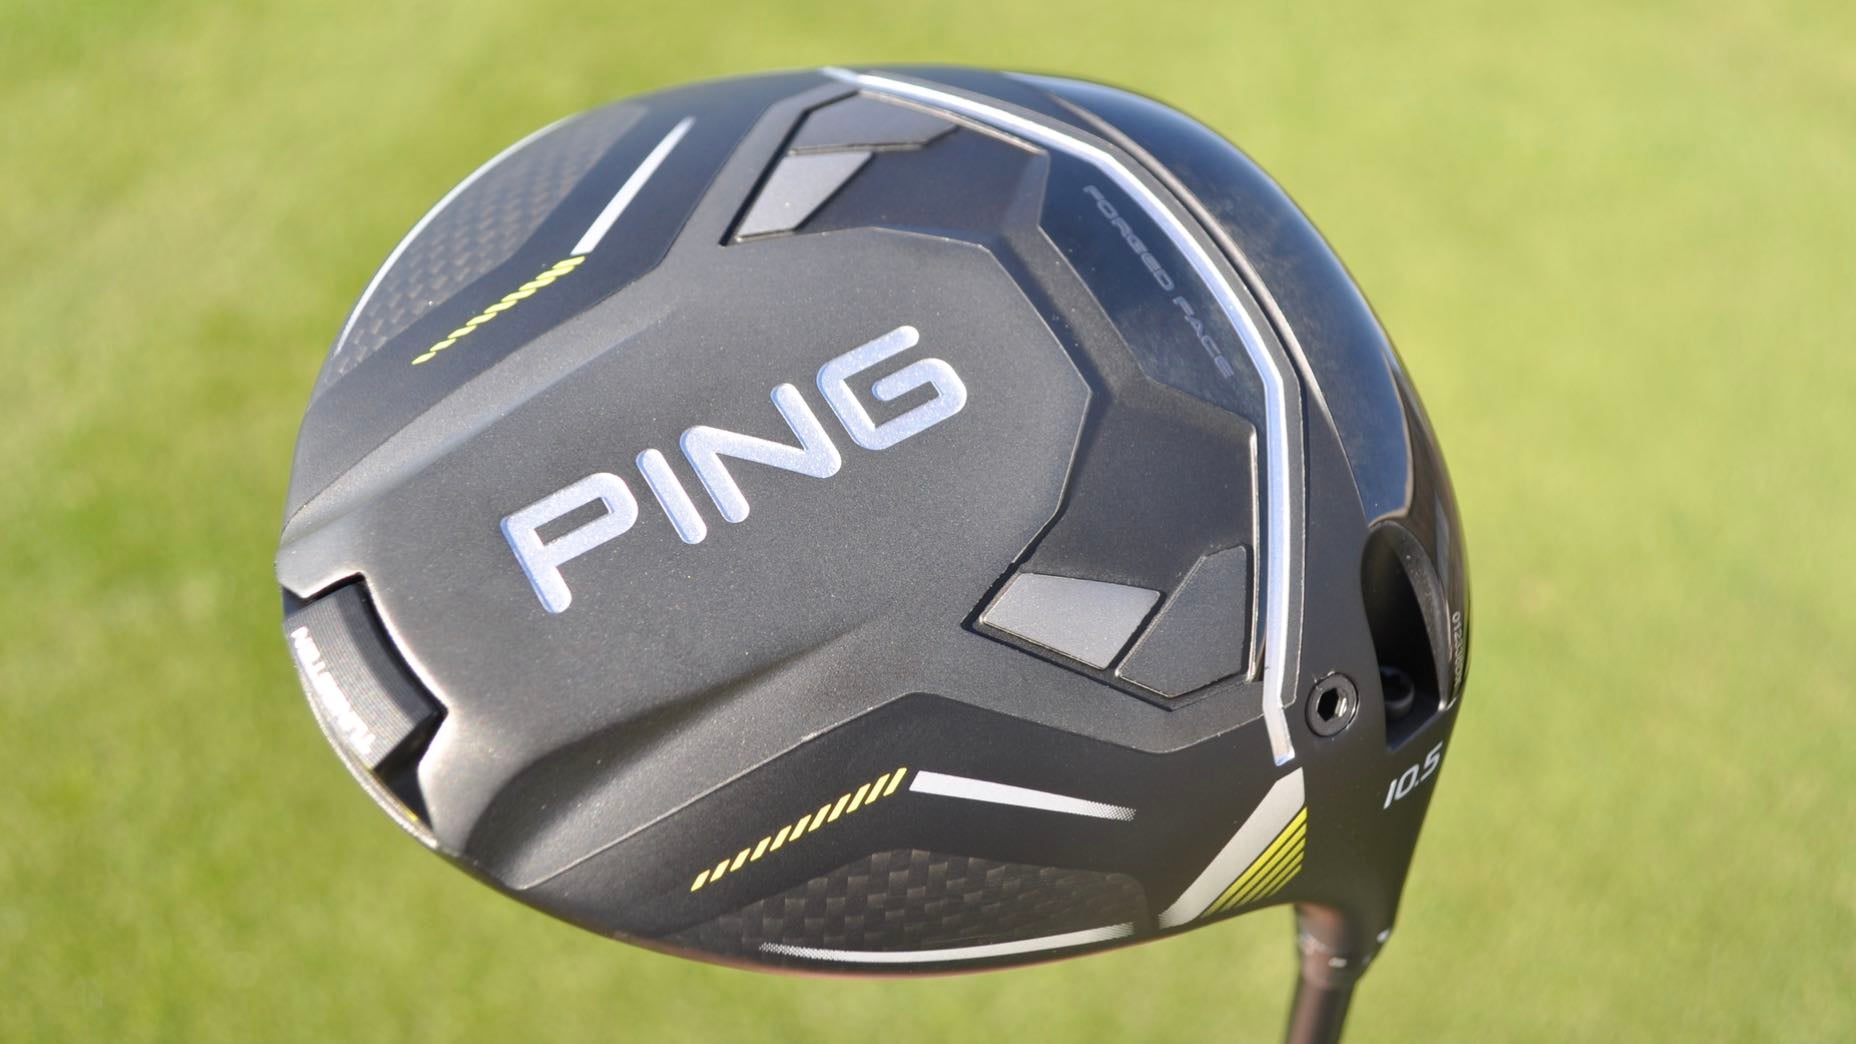 Ping's G430 MAX 10K driver 4 things you need to know